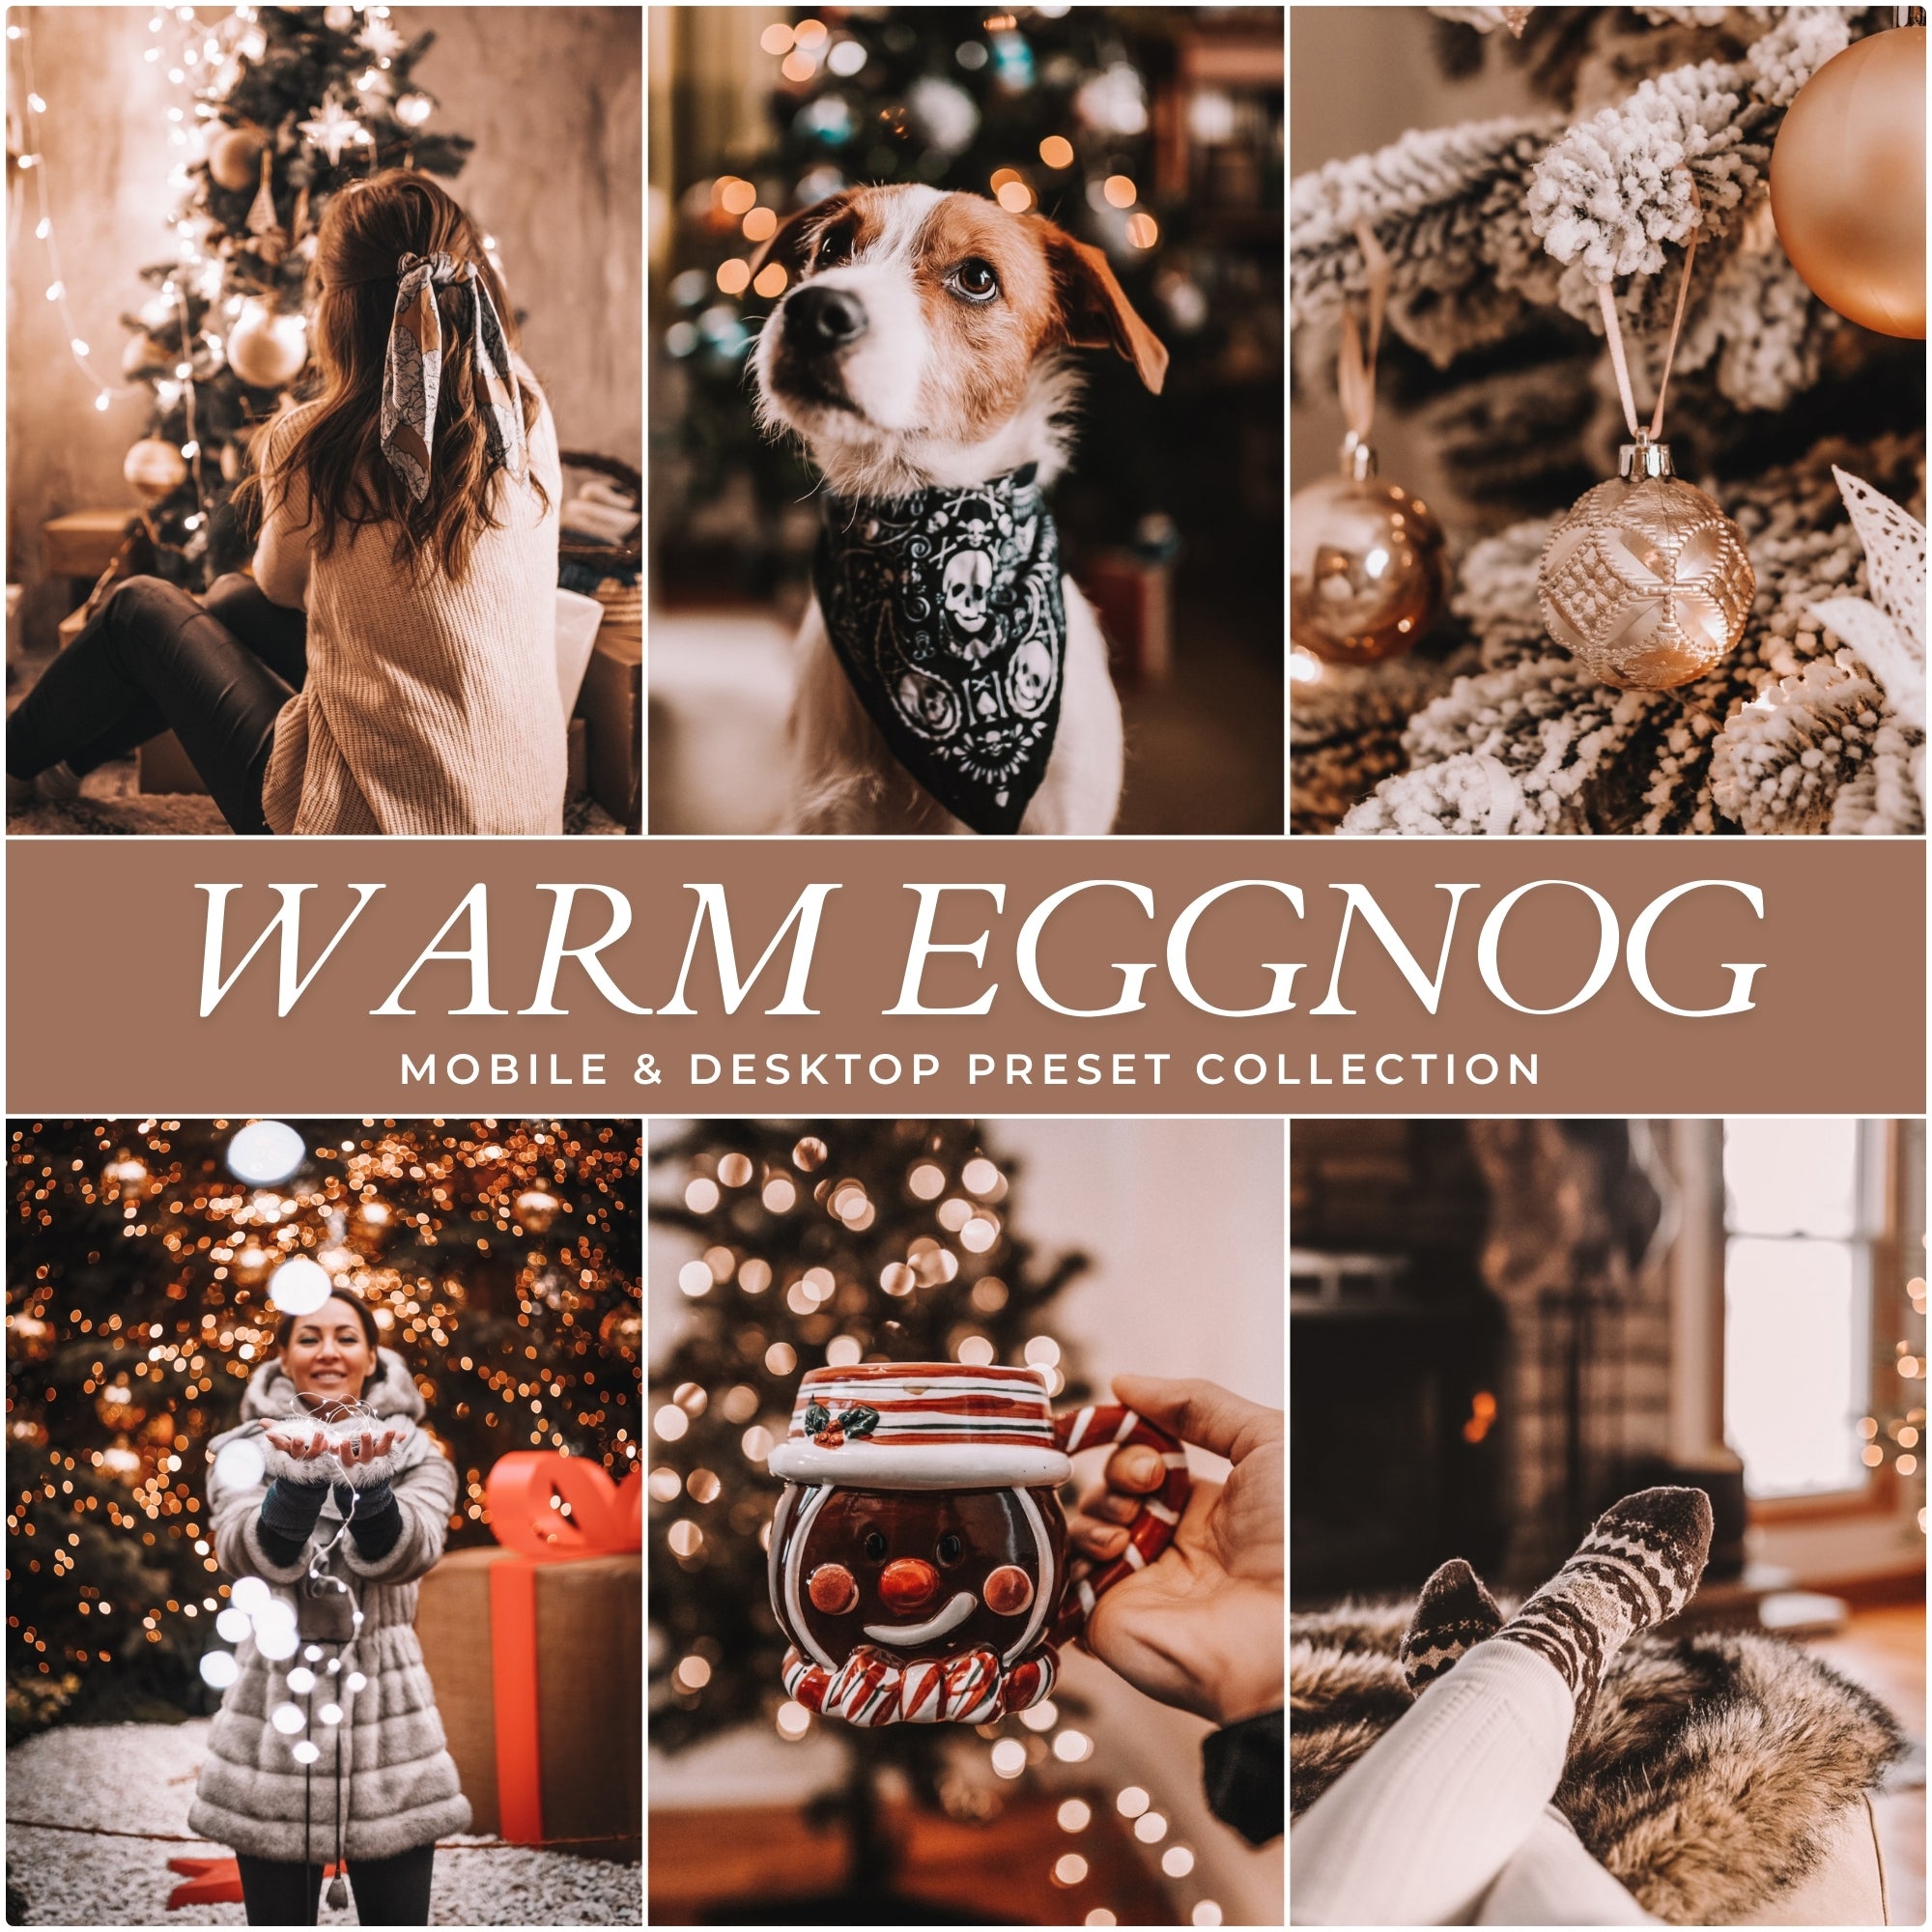 Eggnog Christmas Lightroom Presets For Photographers and Instagram Influencers Photo Editing In Adobe Lightroom By Lou And Marks Presets